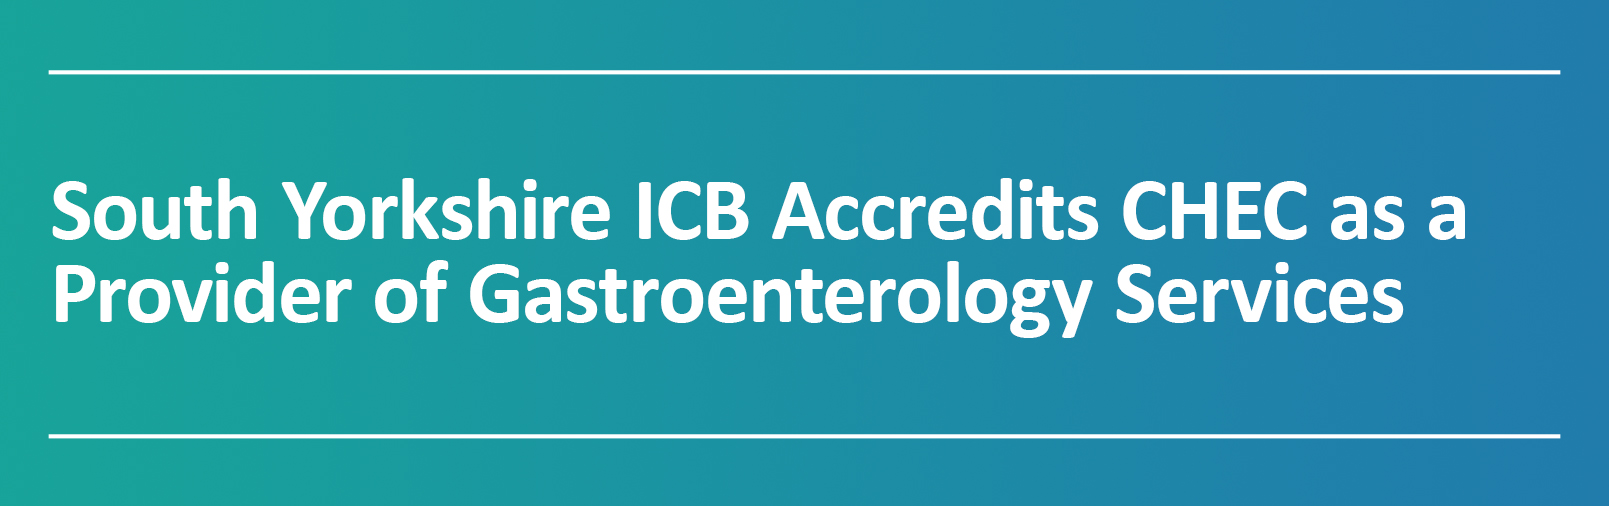 south yorkshire icb accredits chec as a provider of gastroenterology services